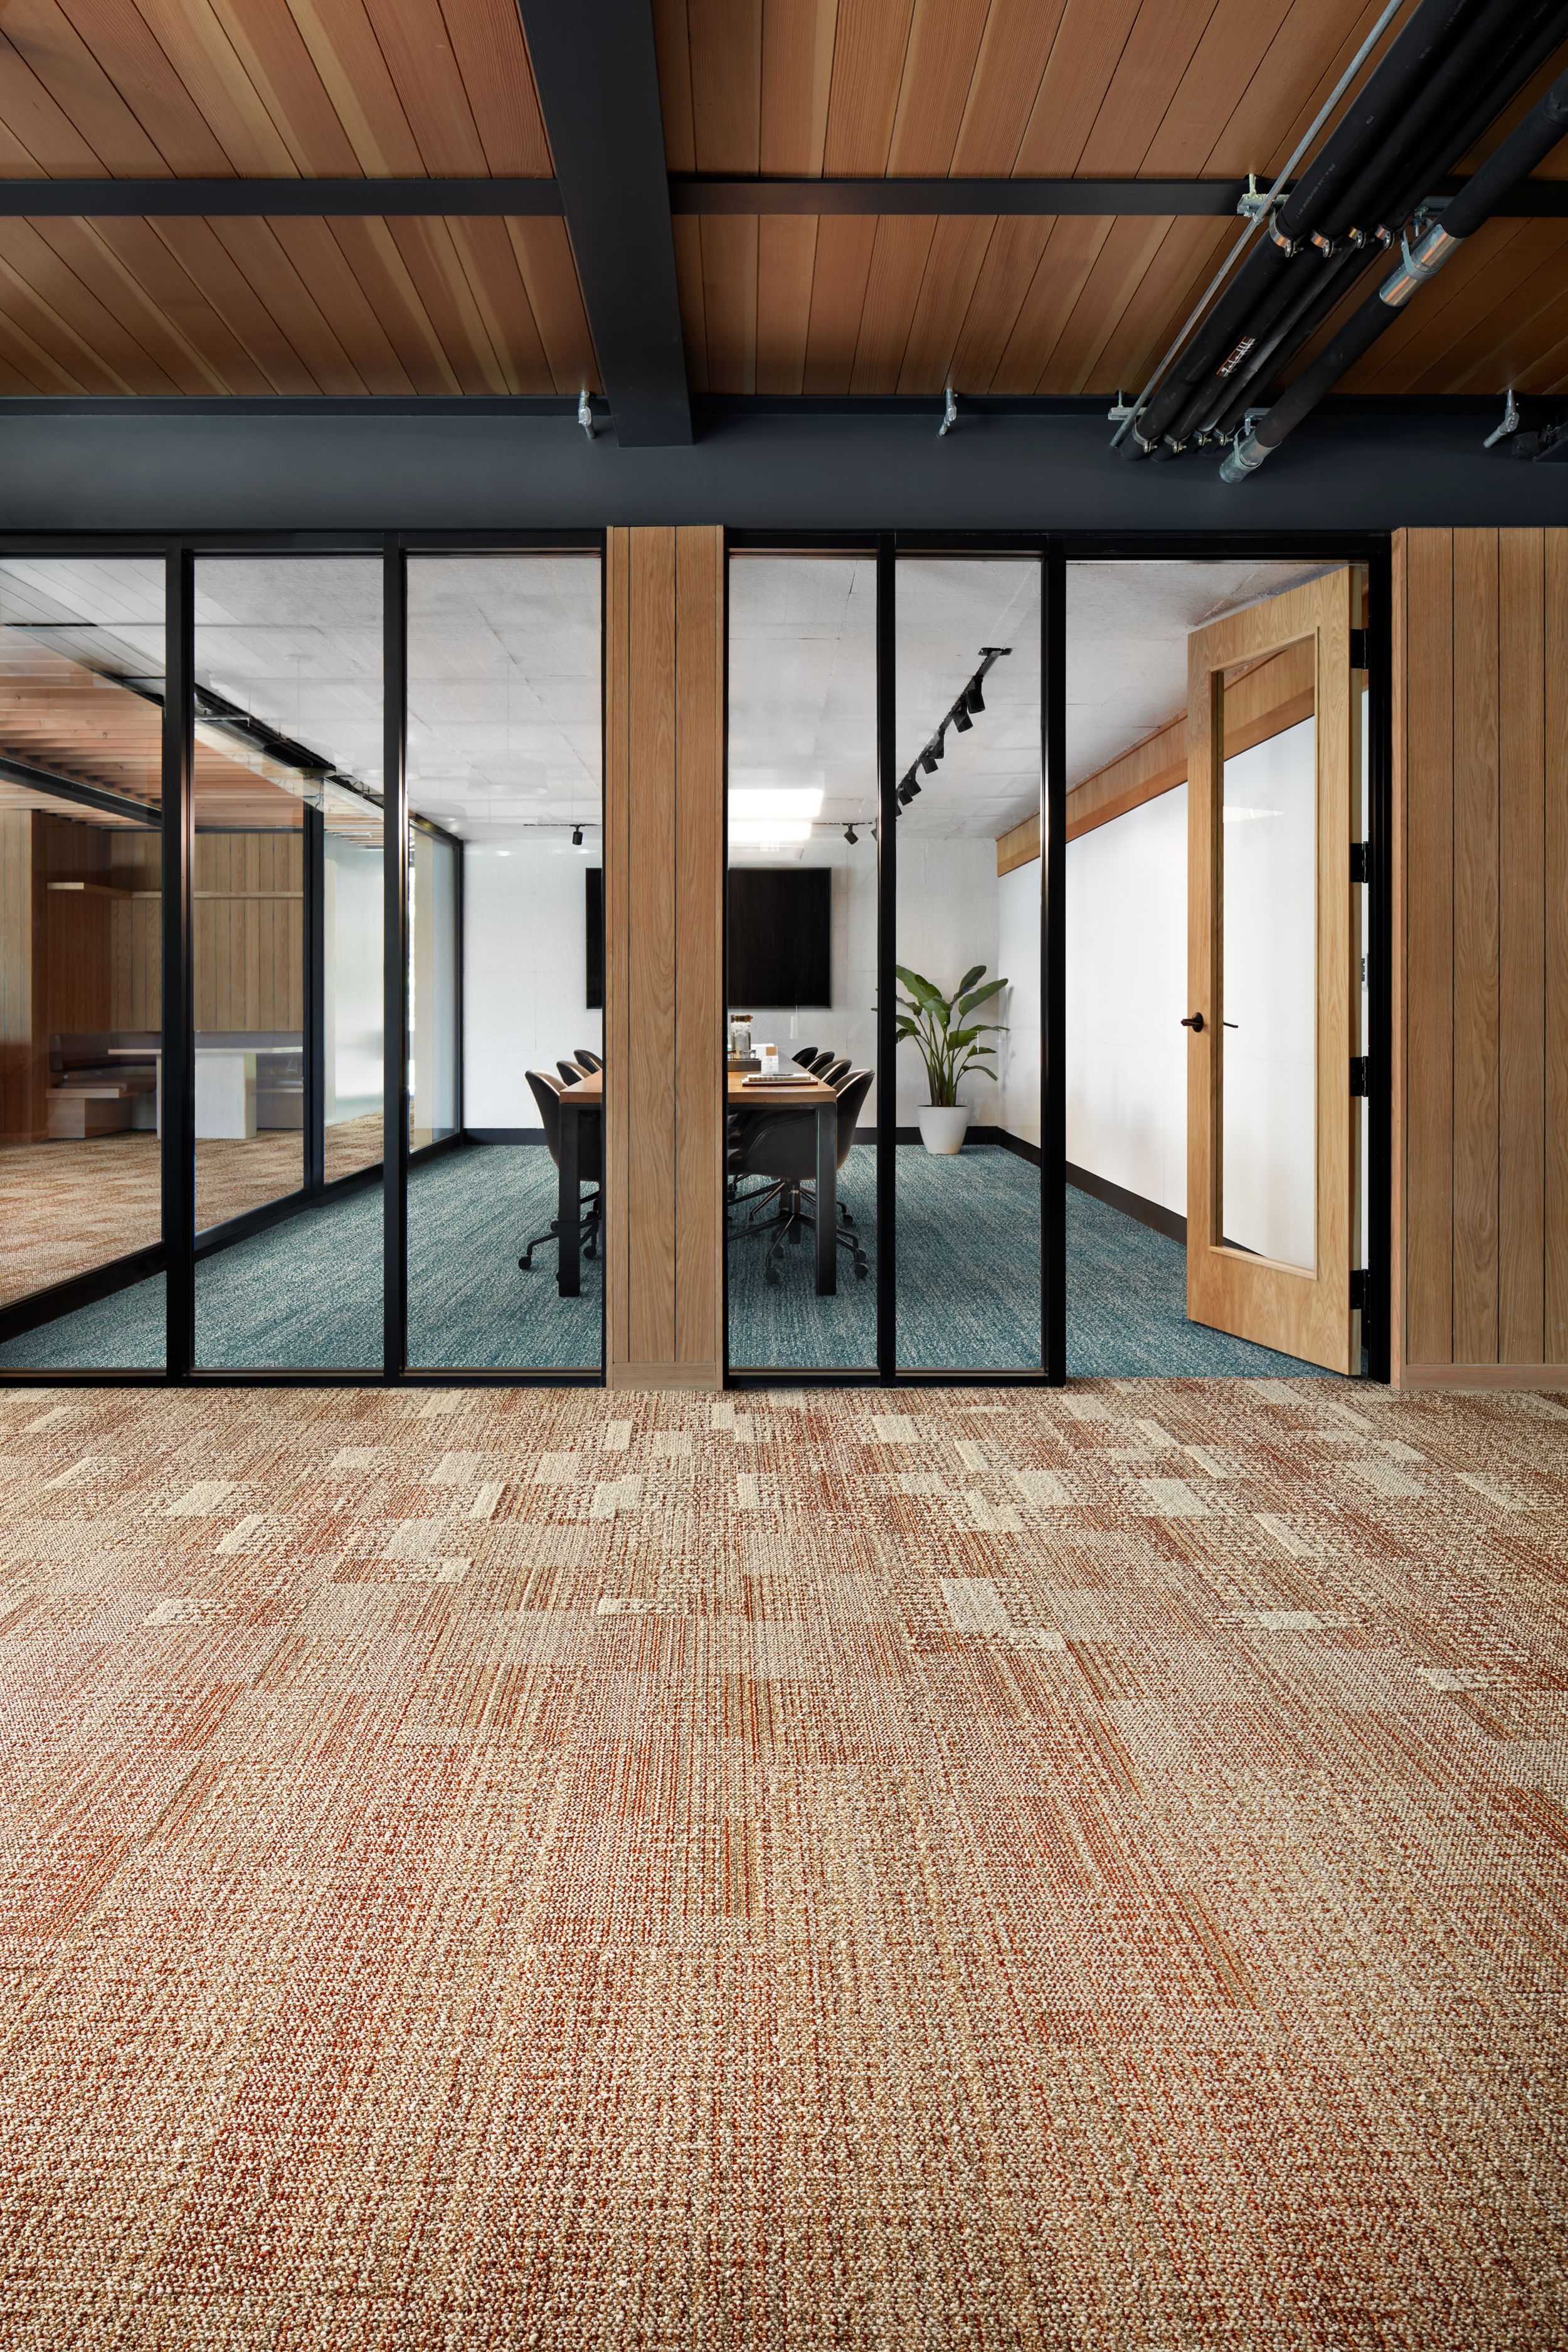 Interface Dot 2 Dot, Dot O-Mine and Diddley Dot plank carpet tile in meeting room image number 8